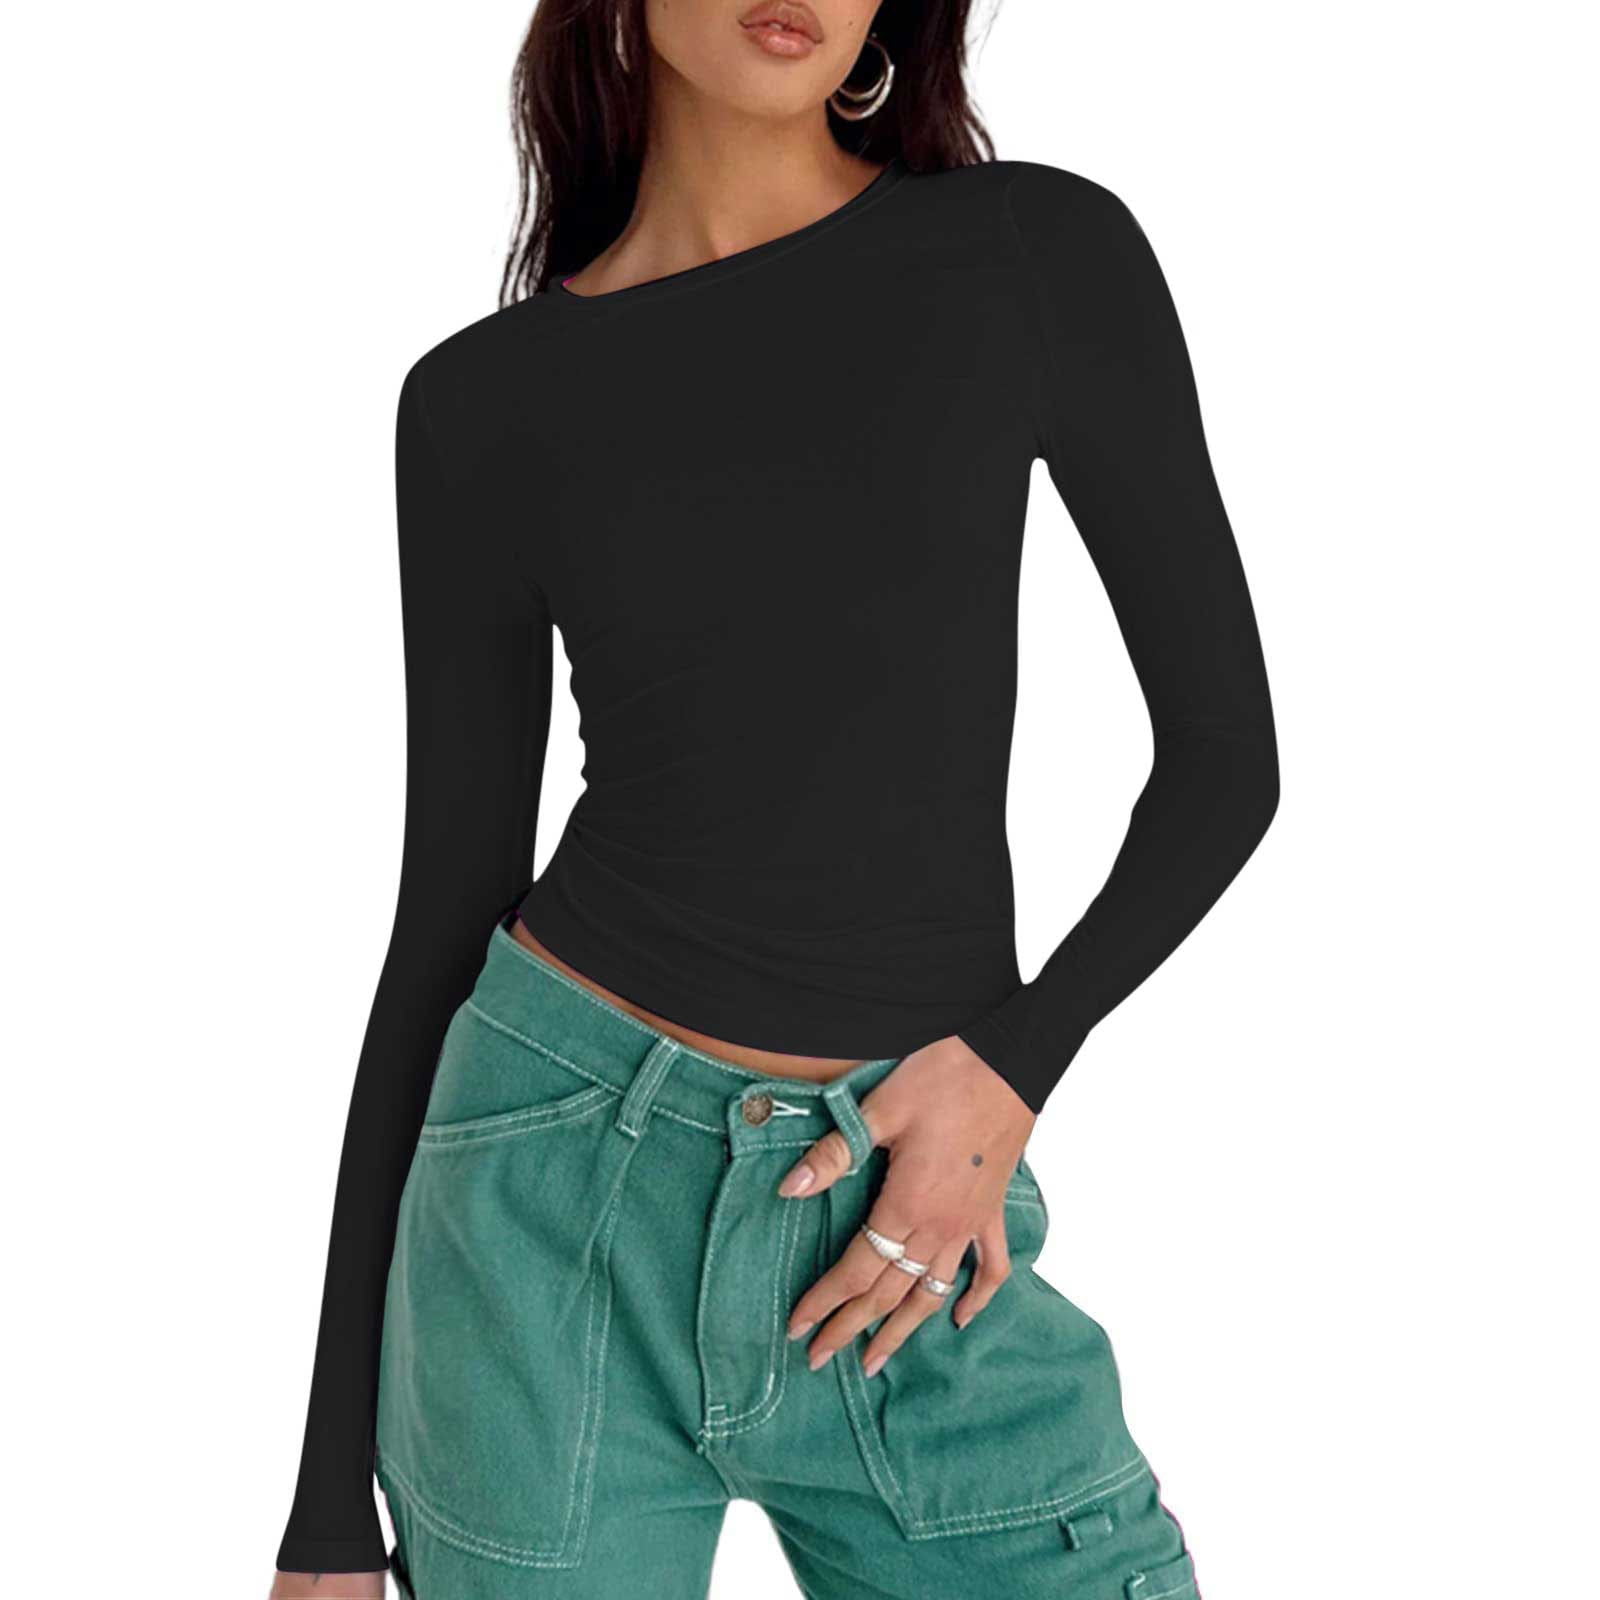 Margaret Mitchell spids Ledningsevne Olyvenn Women's Trendy Stretch Tight Fit T-Shirts Clearance Short Sleeve  Tees Solid Tops Crew Neck Shirts Skinny Flowy Slim Fit Casual Croped Blouse  Clothing 2023 Fashion Summer Black 8 - Walmart.com